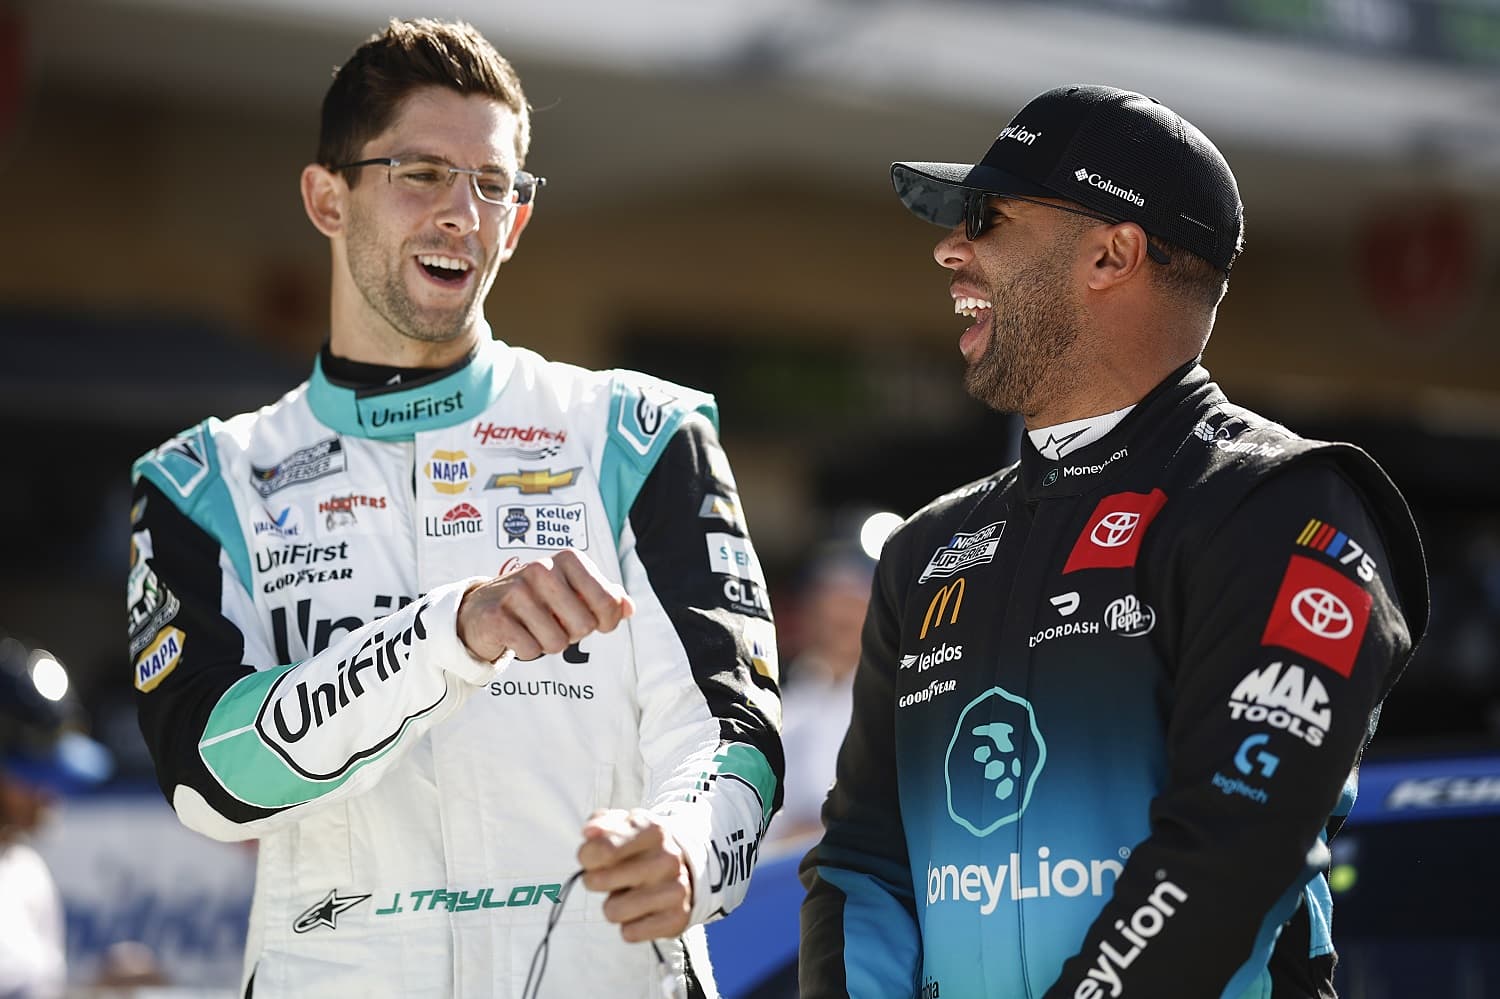 Drivers Jordan Taylor and Bubba Wallace share a laugh during qualifying for the NASCAR Cup Series EchoPark Automotive Grand Prix at Circuit of The Americas on March 25, 2023.